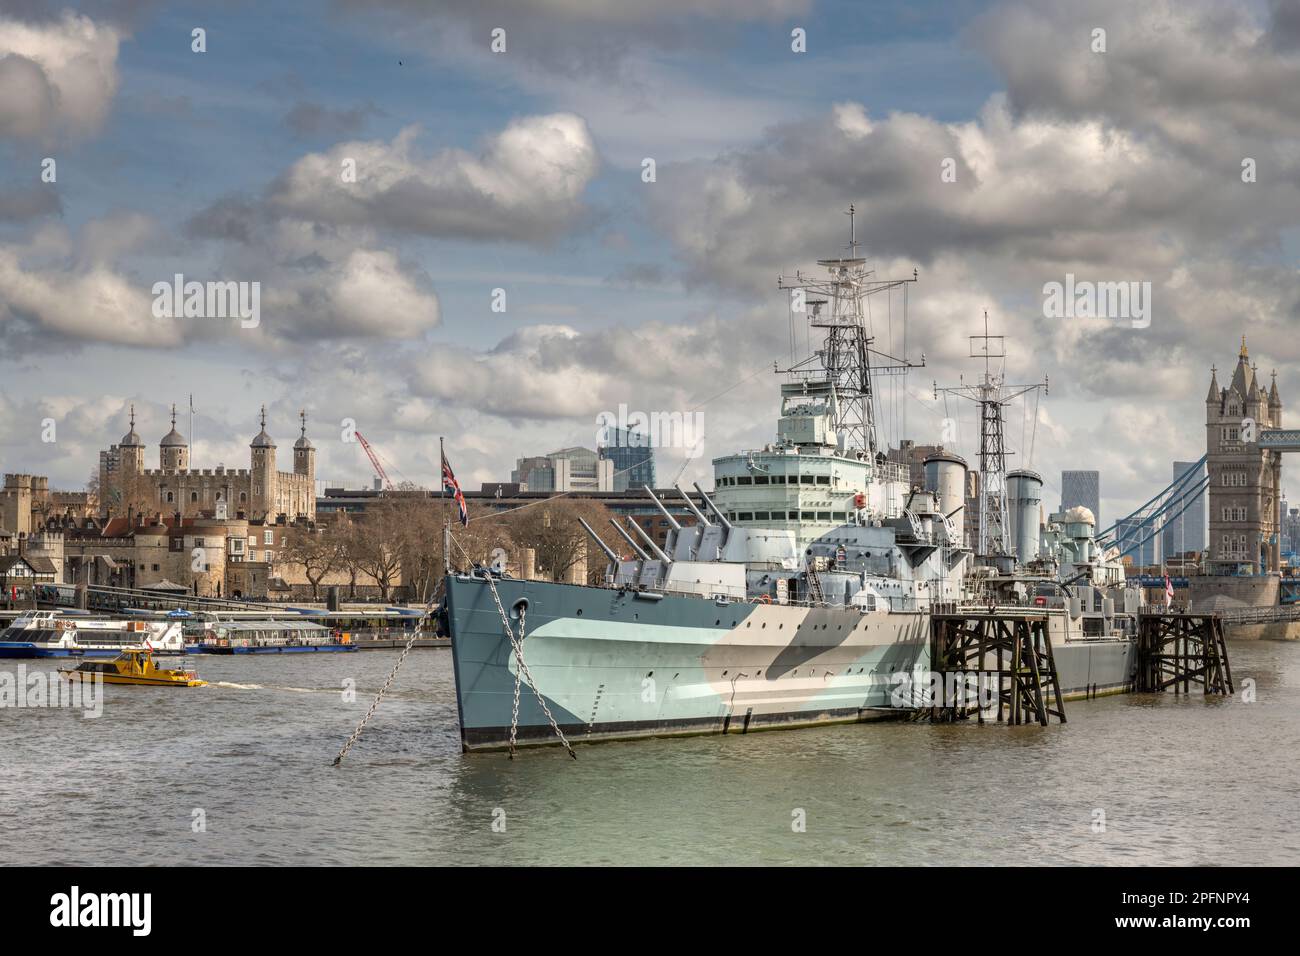 HMS Belfast moored on the River Thames alongside The Queens Walk in the Pool of London, Southwark. HMS Belfast is a Town-Class light cruiser that was Stock Photo